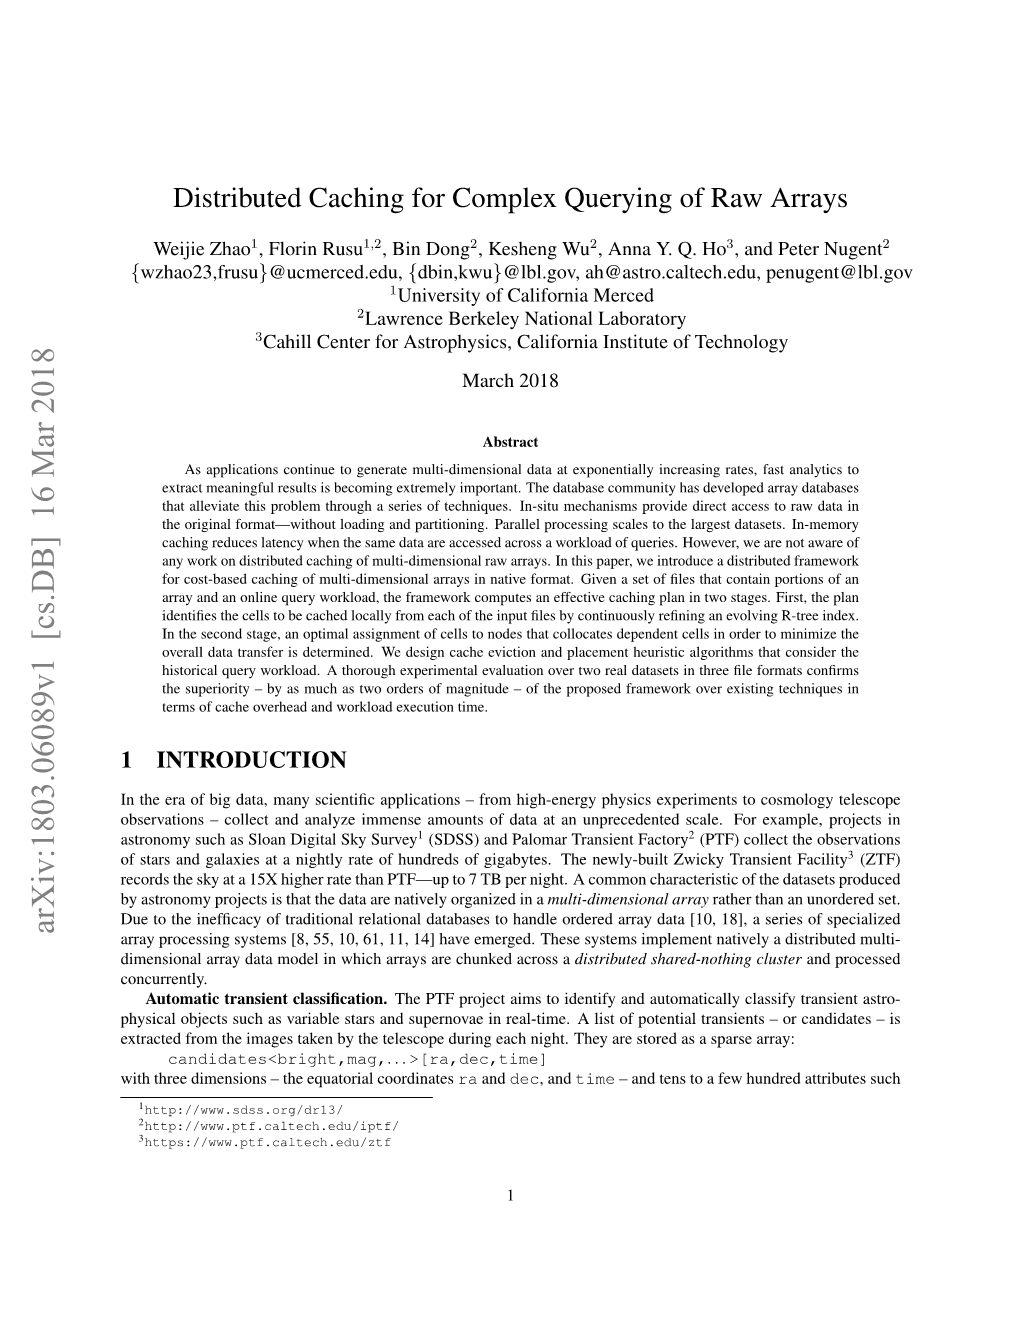 Distributed Caching for Complex Querying of Raw Arrays